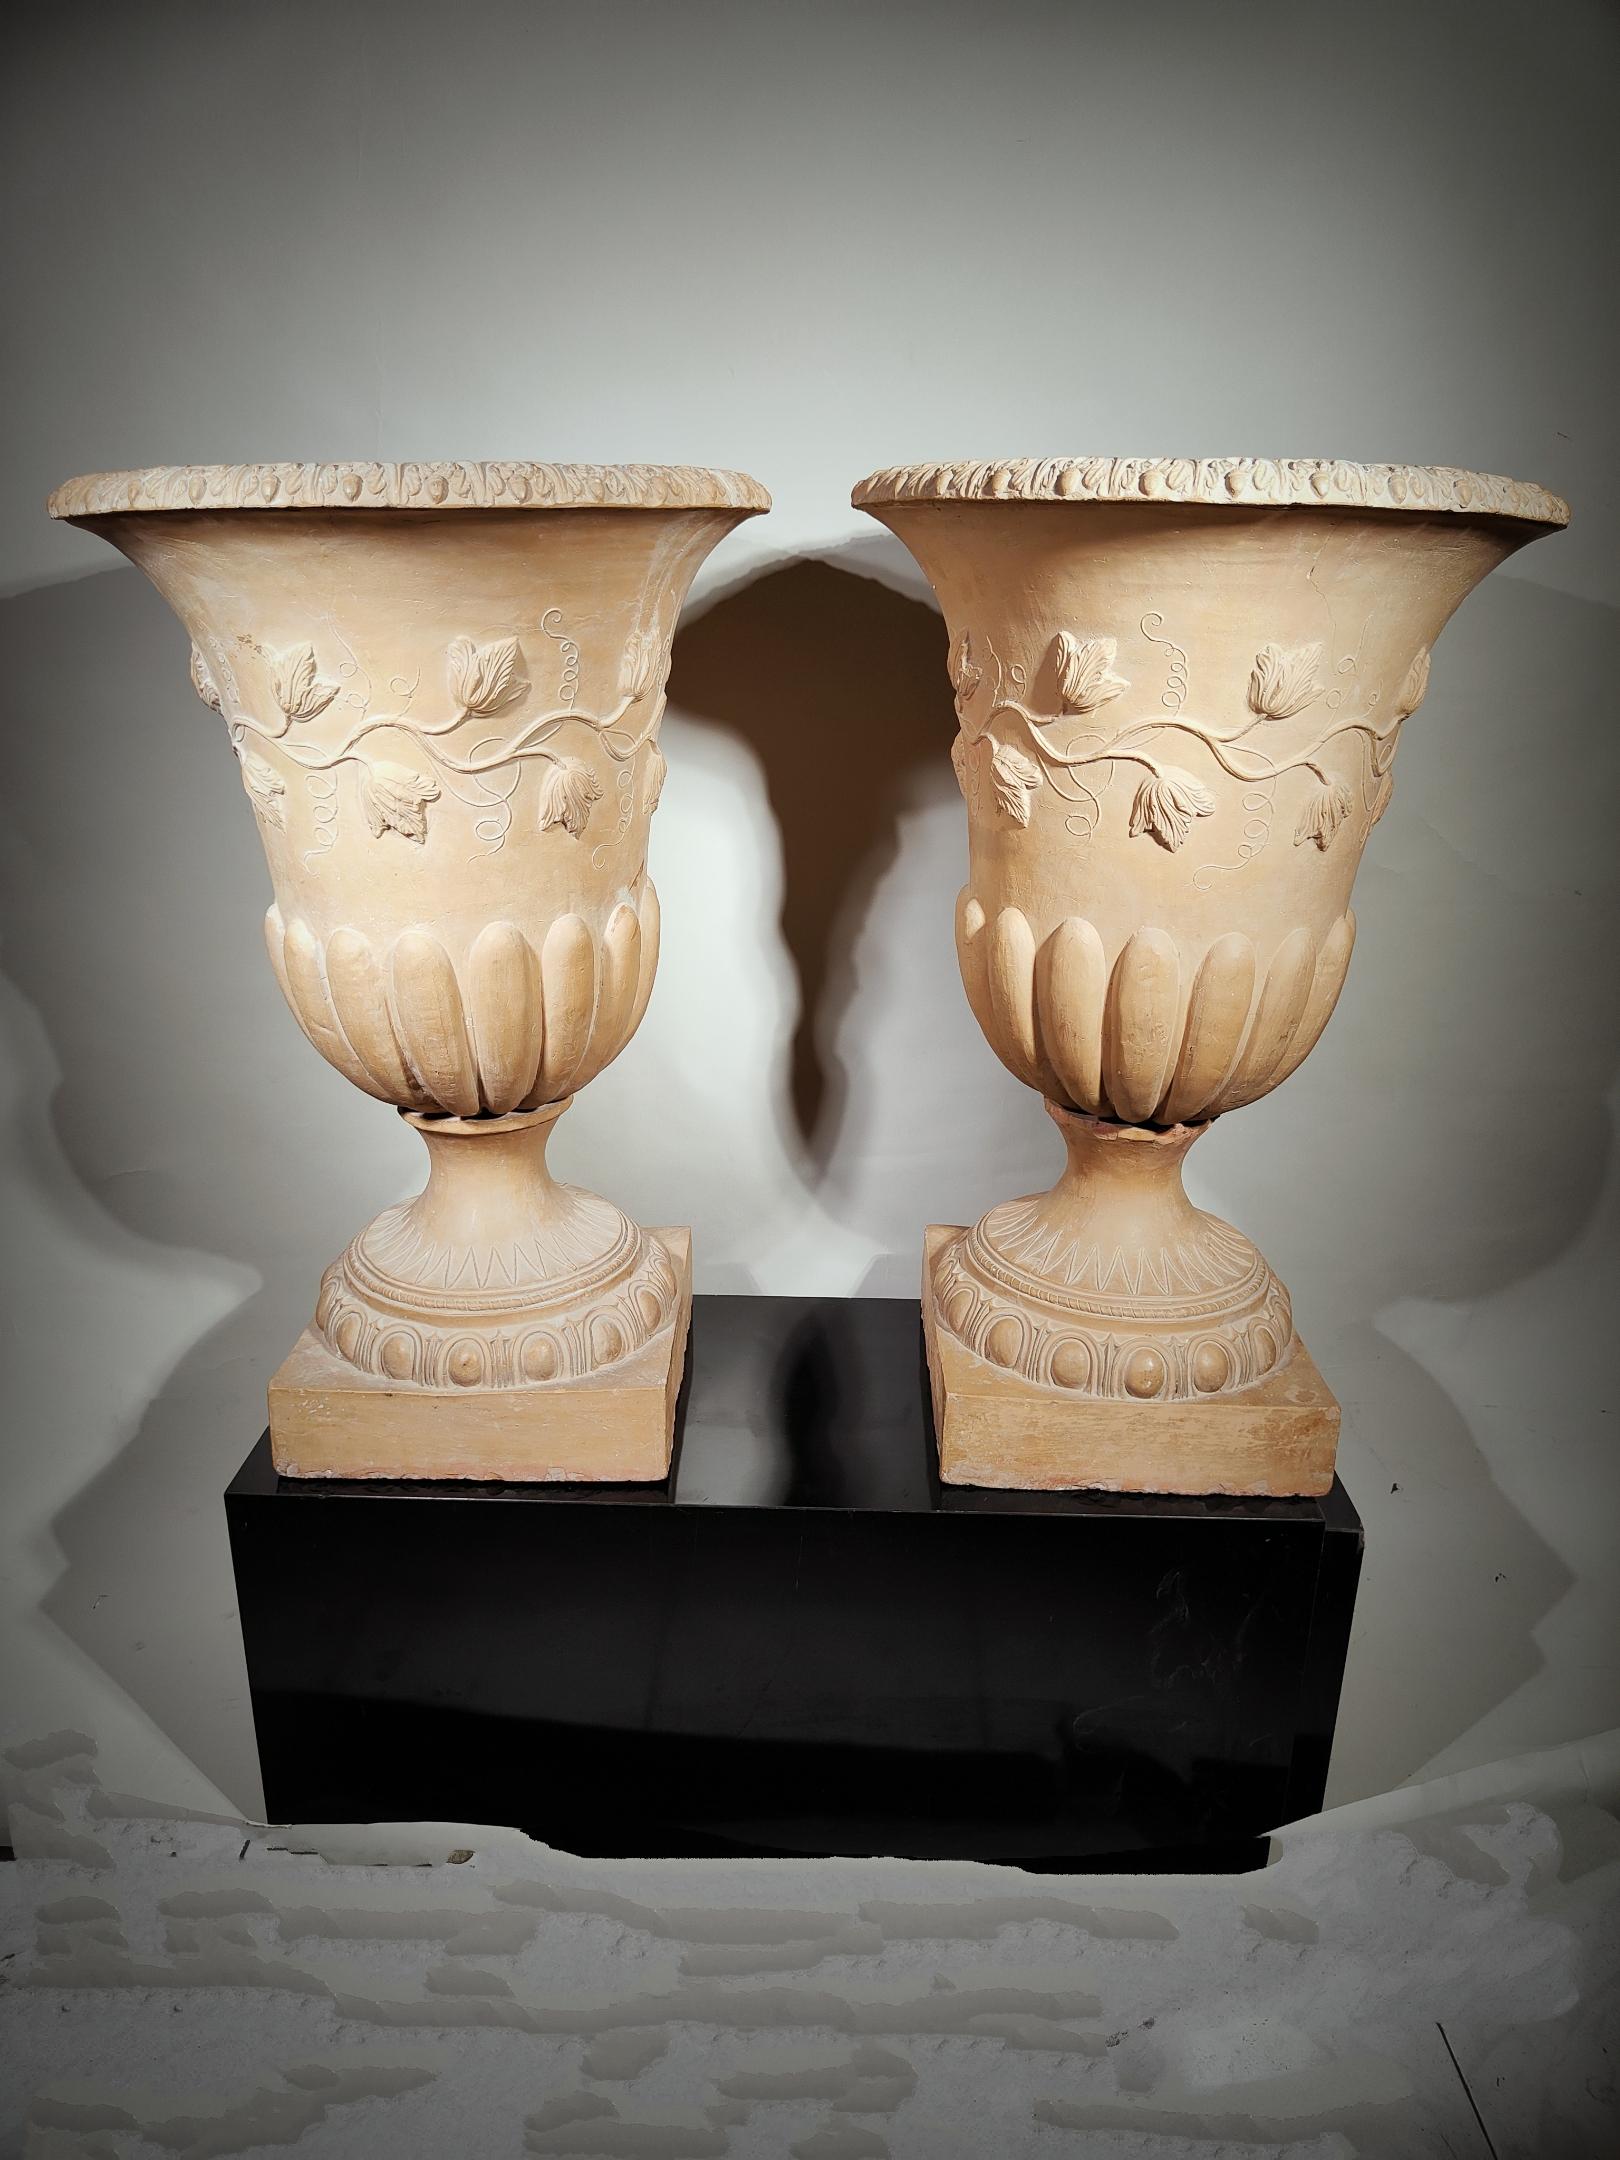 Pair Of Terracotta Cups Dated 1846
PAIR OF TERRACOTTA CUPS DATED 1846
DECORATIVE TERRACOTTA CUPS FROM 1846 MEDICI STYLE DECORATED WITH FLOWERS. THE CUPS ARE DATED 1846 AND THE POTTER'S MARK IN THE FORM OF A STAR. MEASUREMENTS: 75 CM HEIGHT AND 52